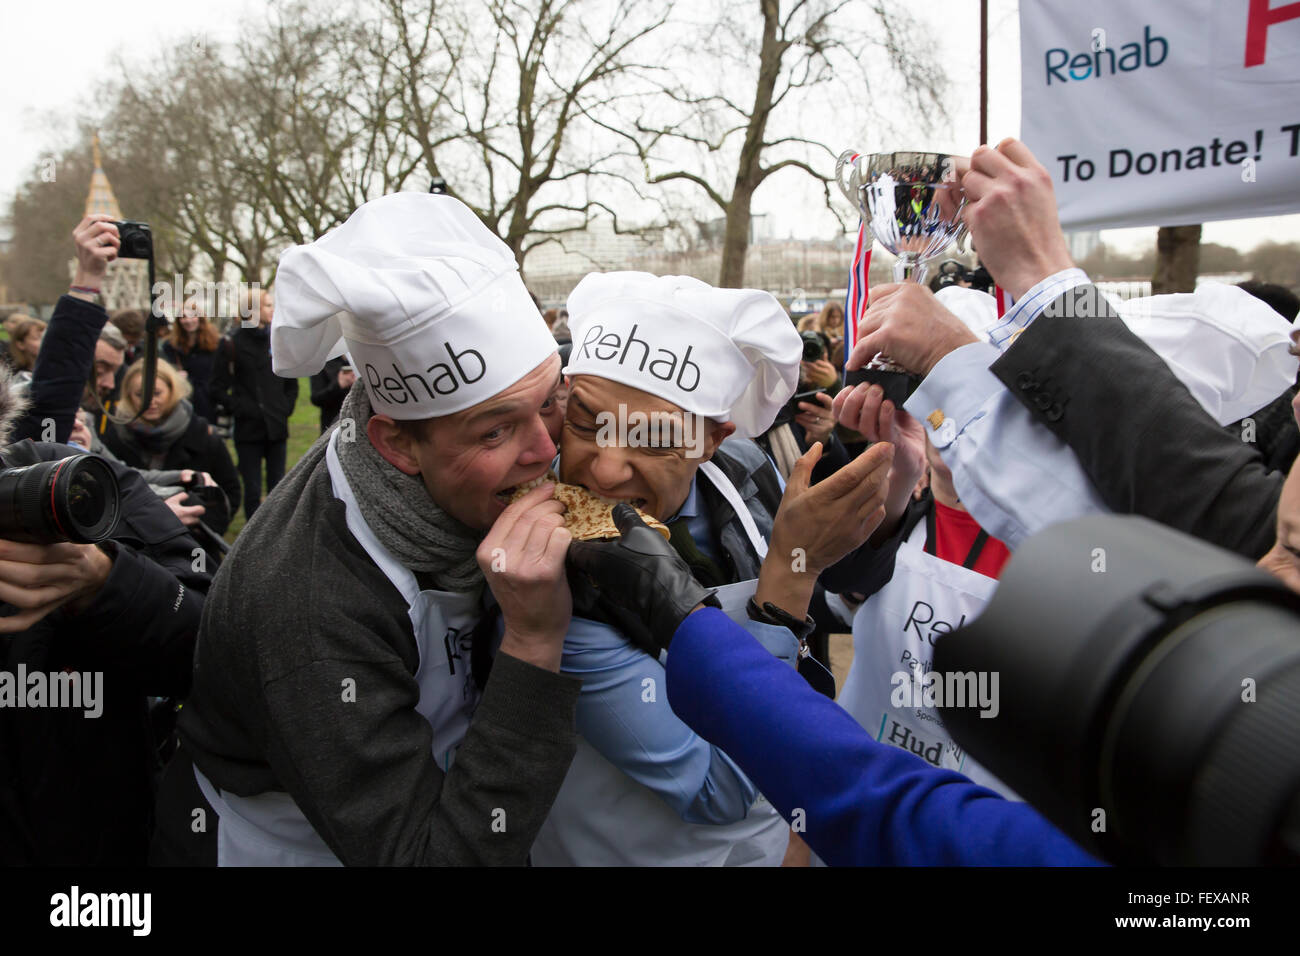 Westminster, London, UK. 9th February 2016. MP'S team celebrate by eating the pancakes after they won the Rehab Parliamentary Pancake Race 2016 as runners representing the House of Commons, the House of Lords and the Parliamentary Press Gallery raced against each other while tossing pancakes Credit:  Keith Larby/Alamy Live News Stock Photo